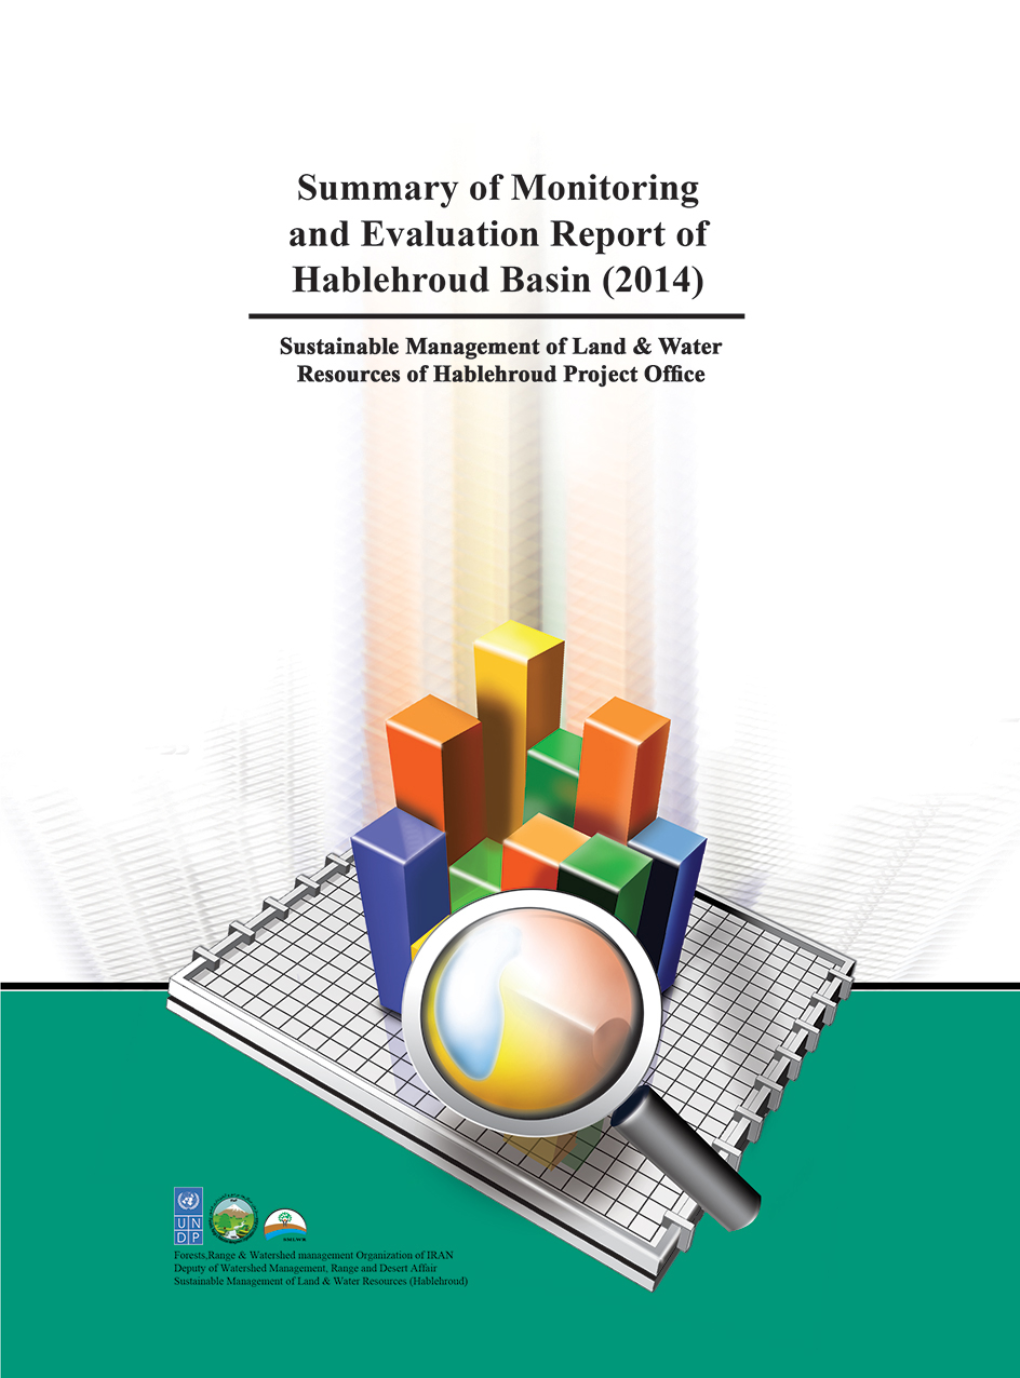 Summary of the Monitoring and Evaluation Report of the Hablehroud Basin